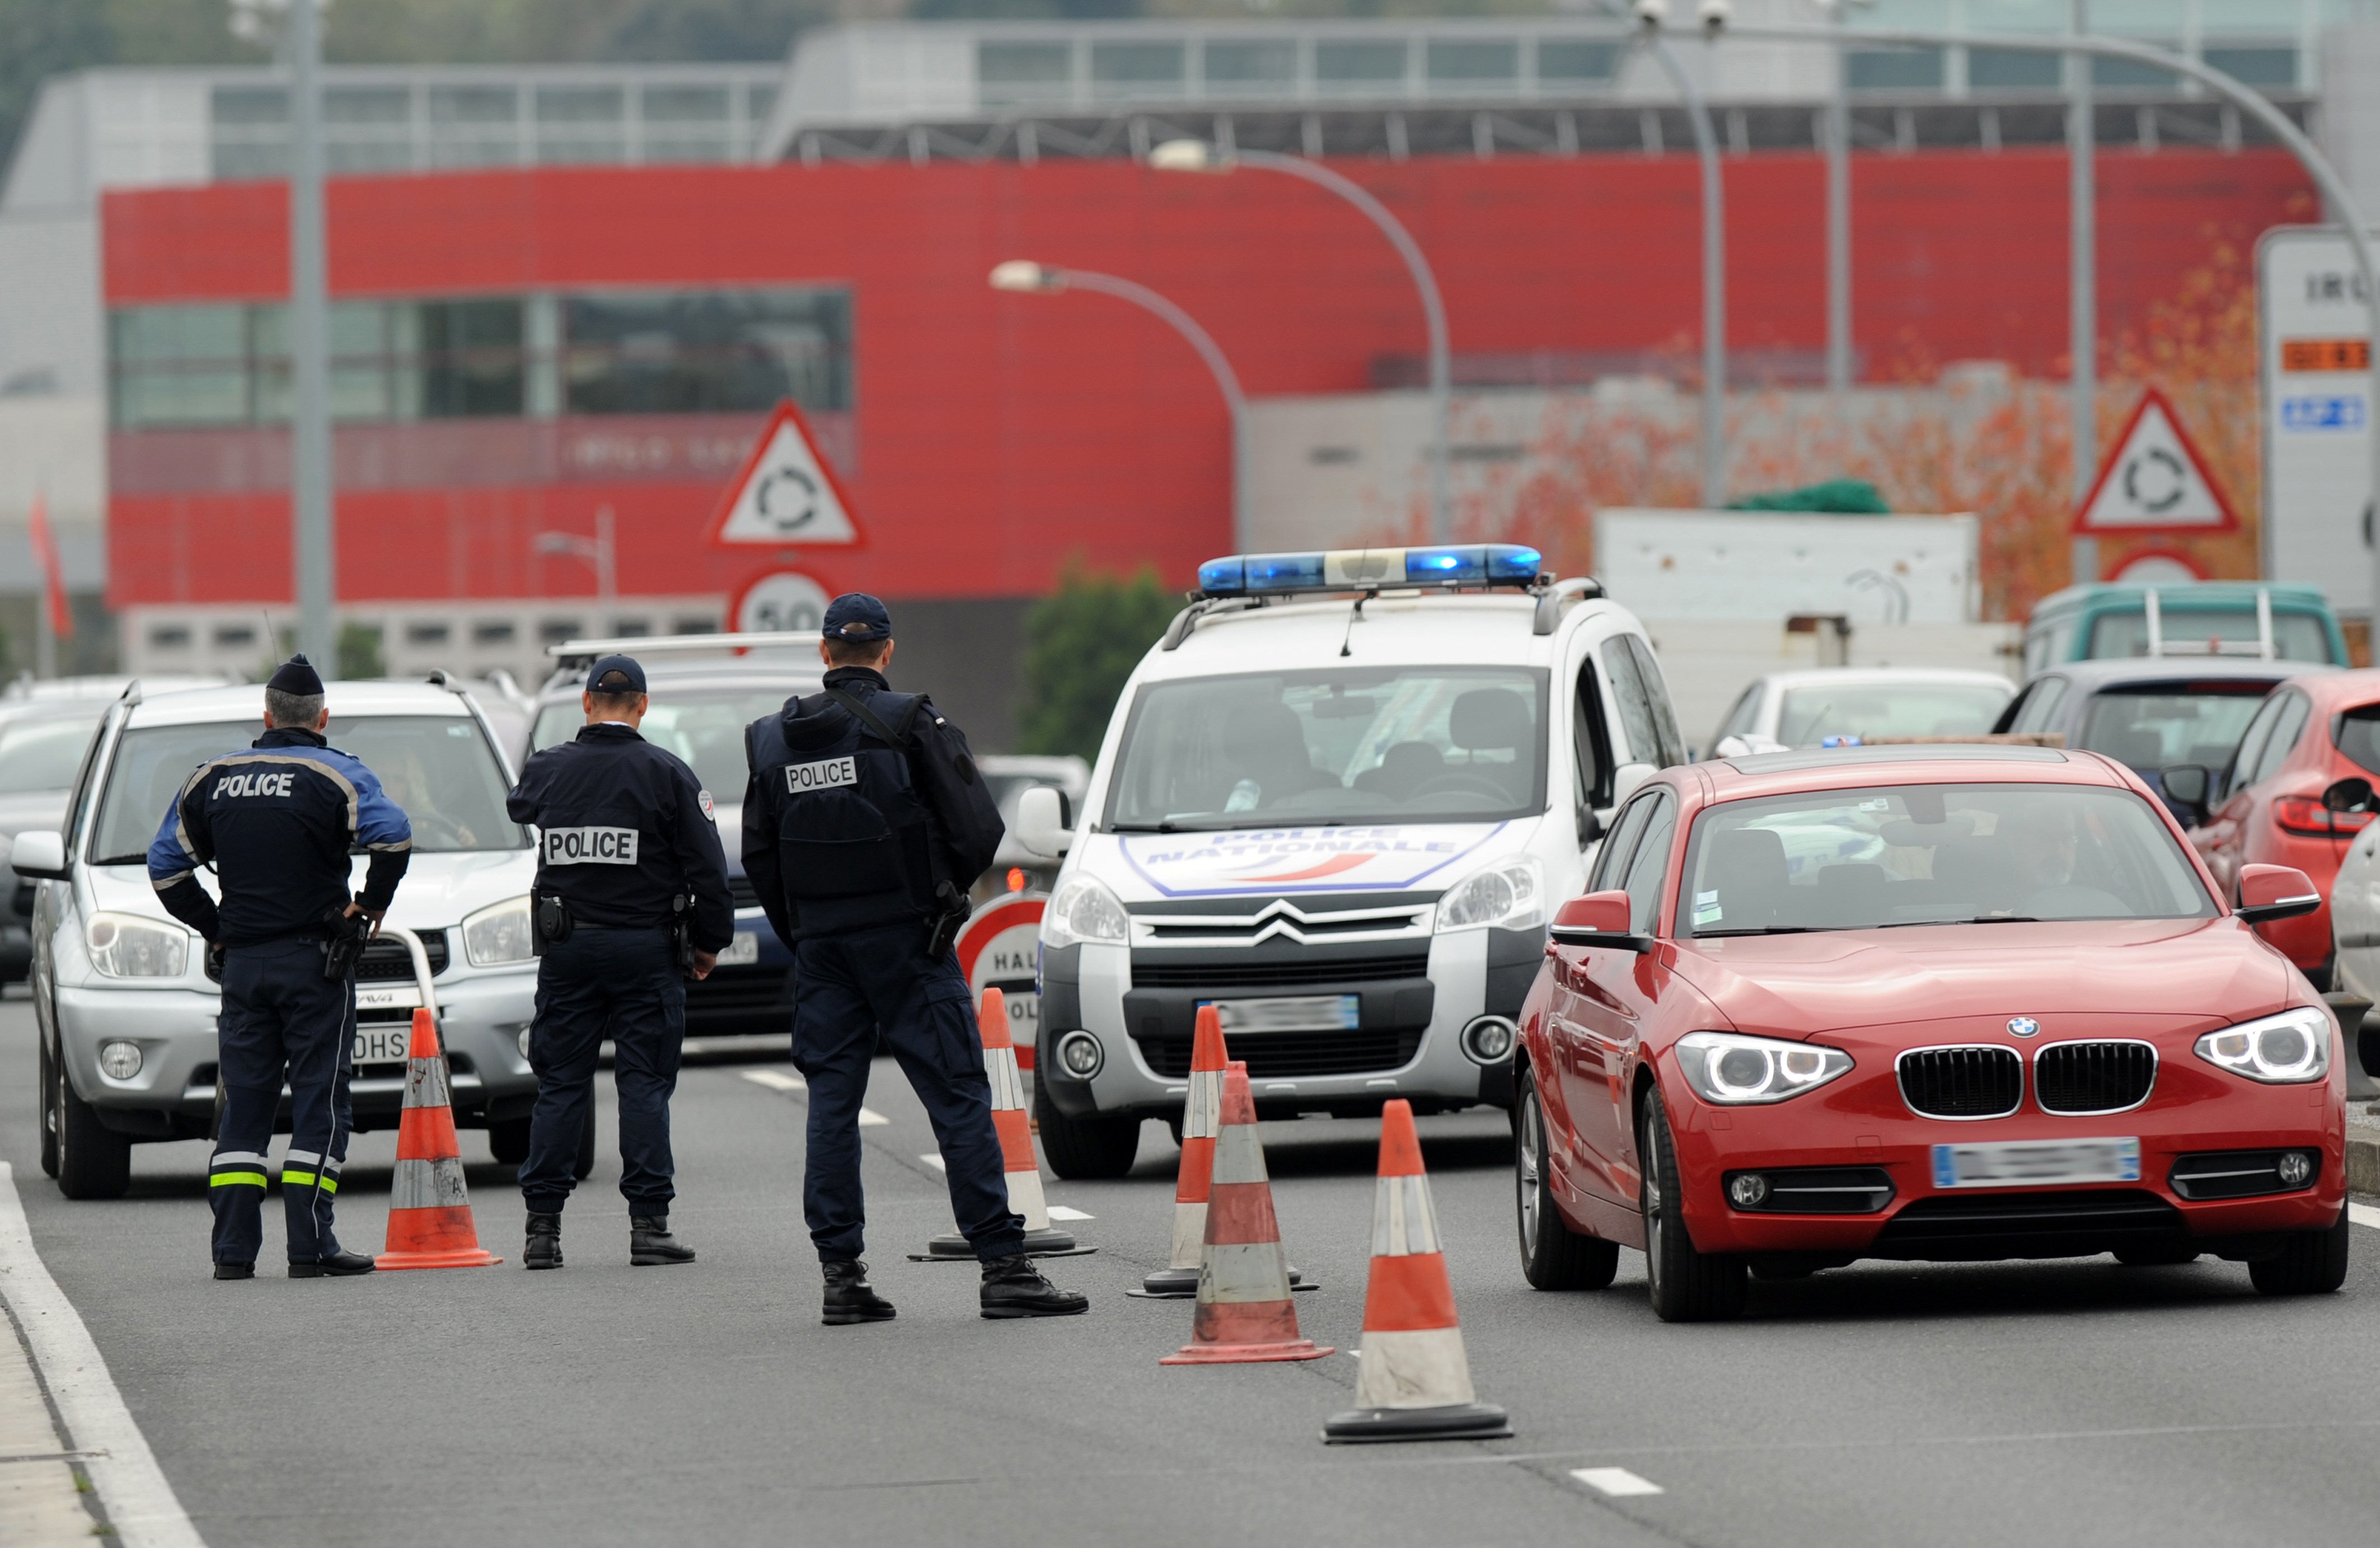 Police controls vehicles leaving France towards Spain at the border post of Hendaye, France on Nov. 14, 2015. (Gaizka Iroz—AFP/Getty Images)